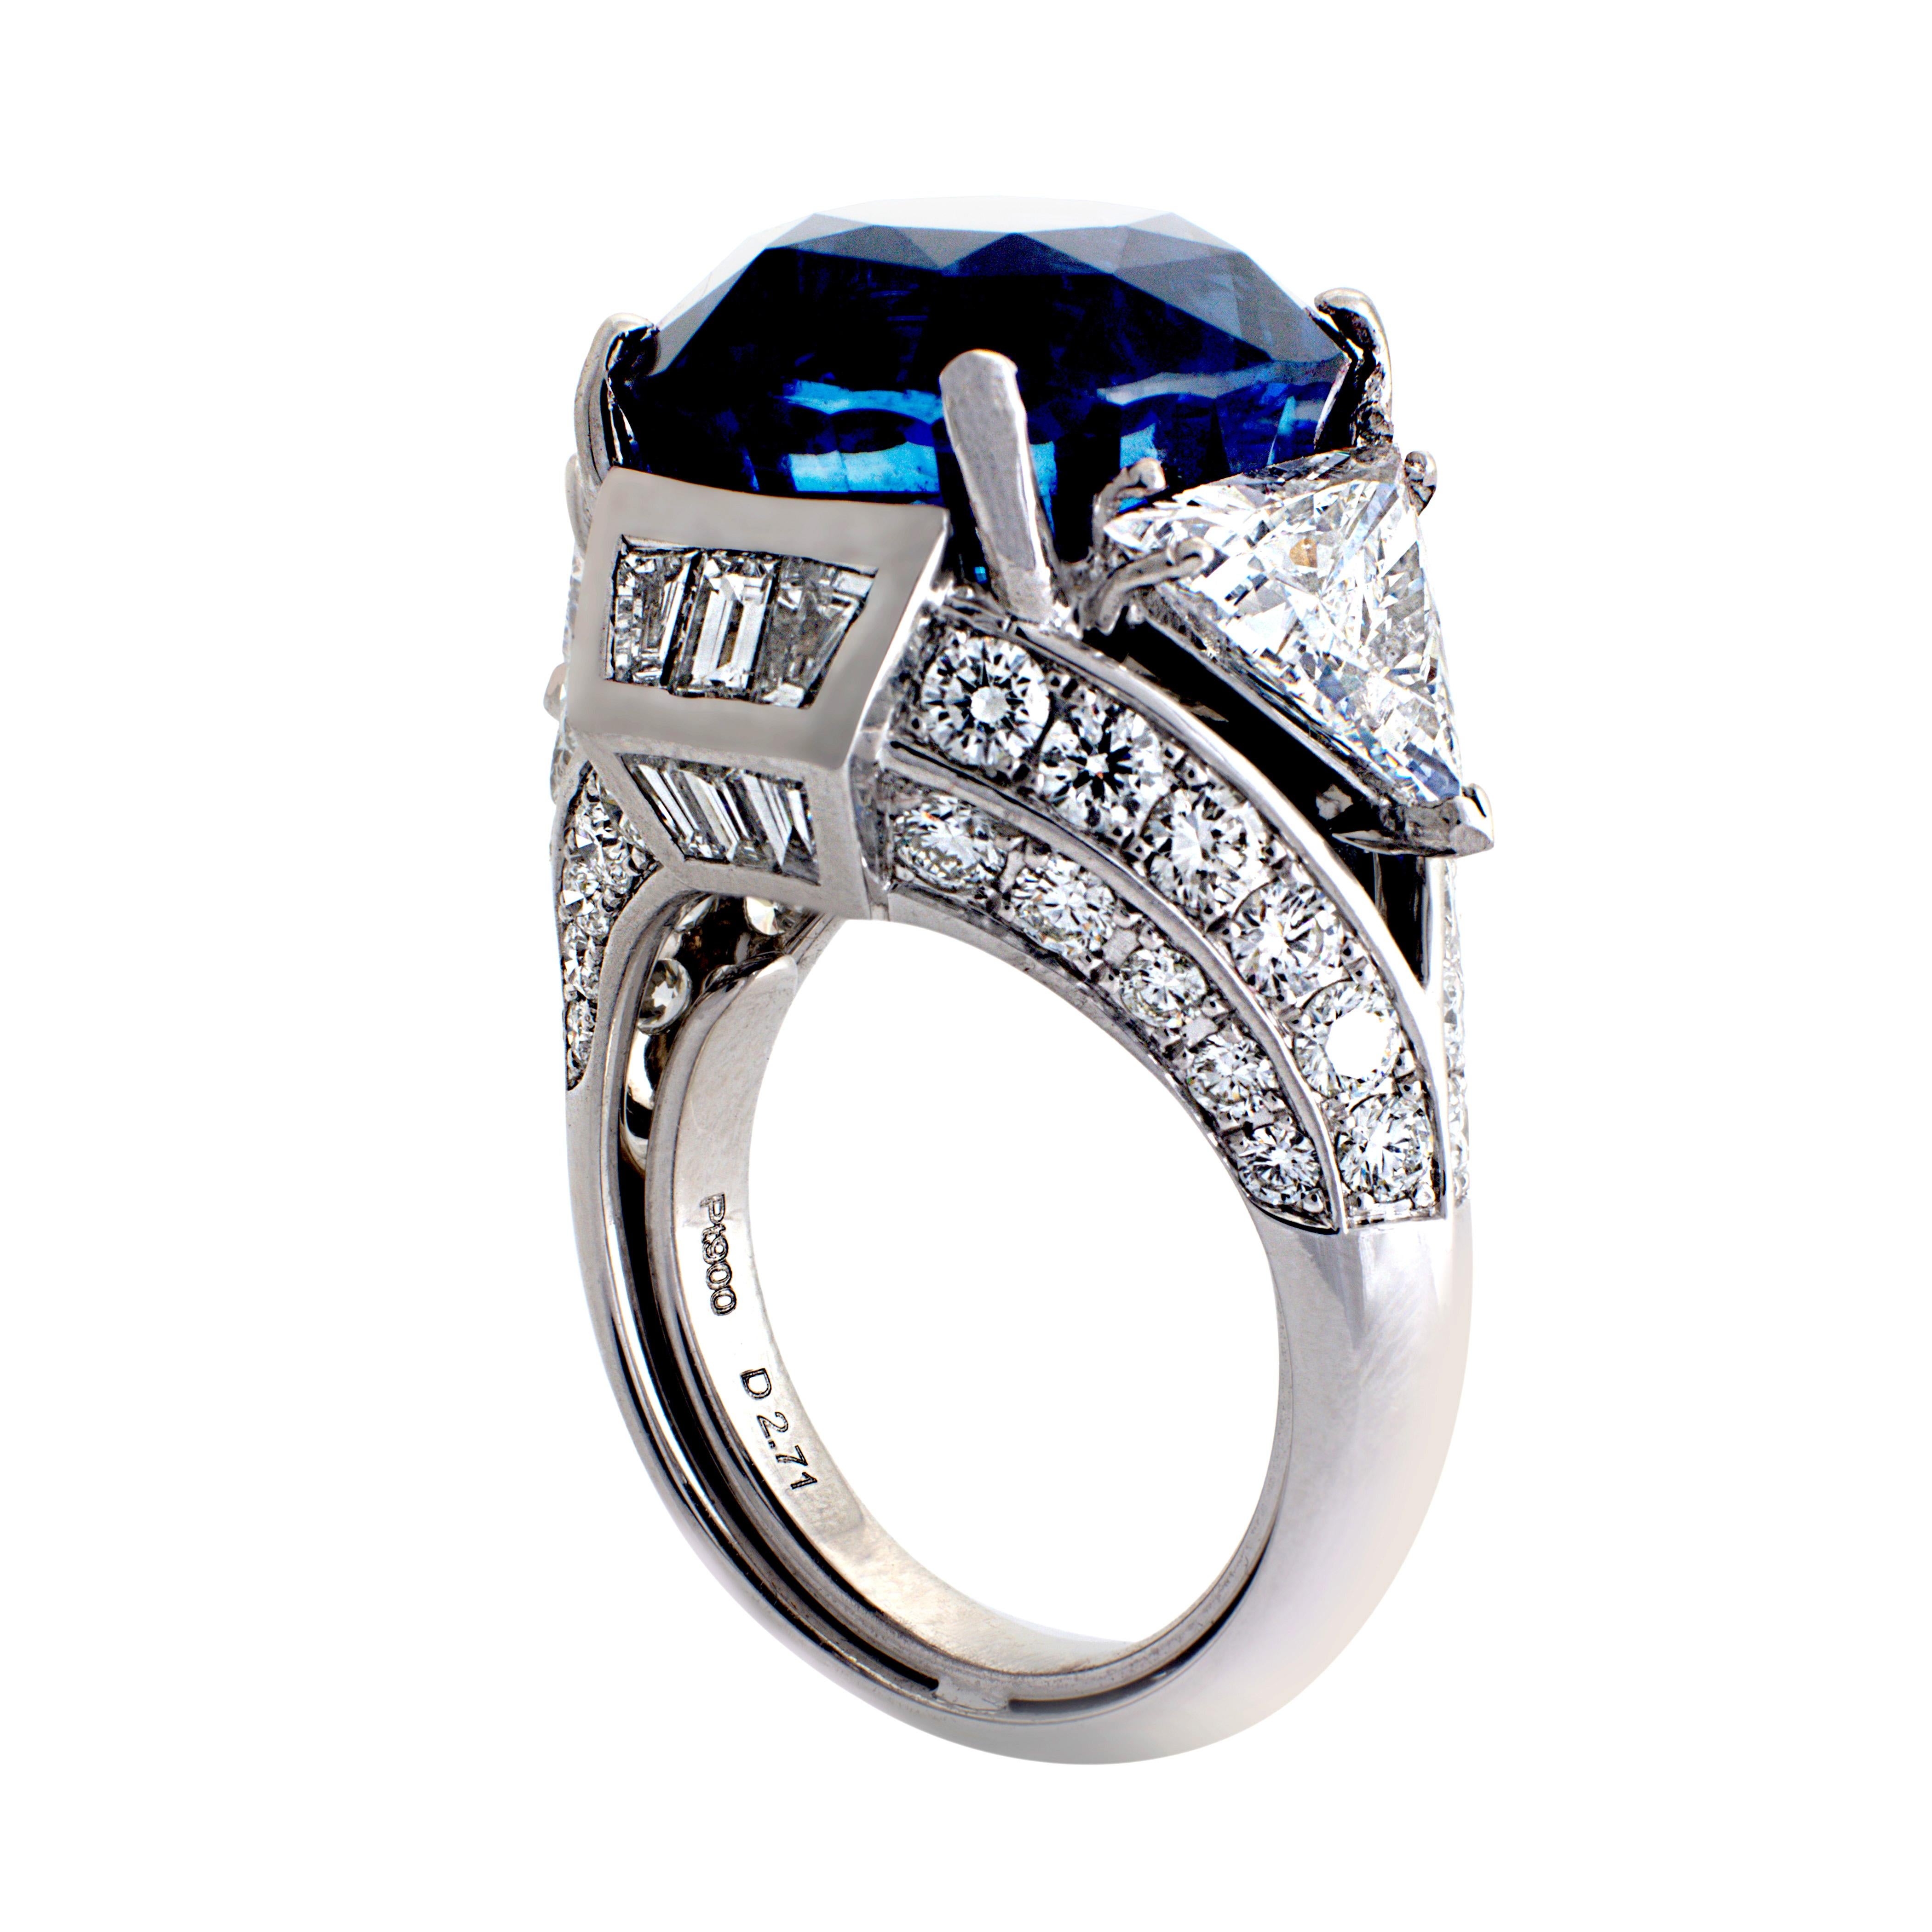 A truly stunning platinum ring, set with a brilliant 21.53 carat GIA Certified, non-heated, vivid blue, cushion-cut Sri Lankan sapphire center stone. The sides are flanked with 2 trillion-cut (Idar-Oberstein Certified) diamonds 1.50 carats and 1.58